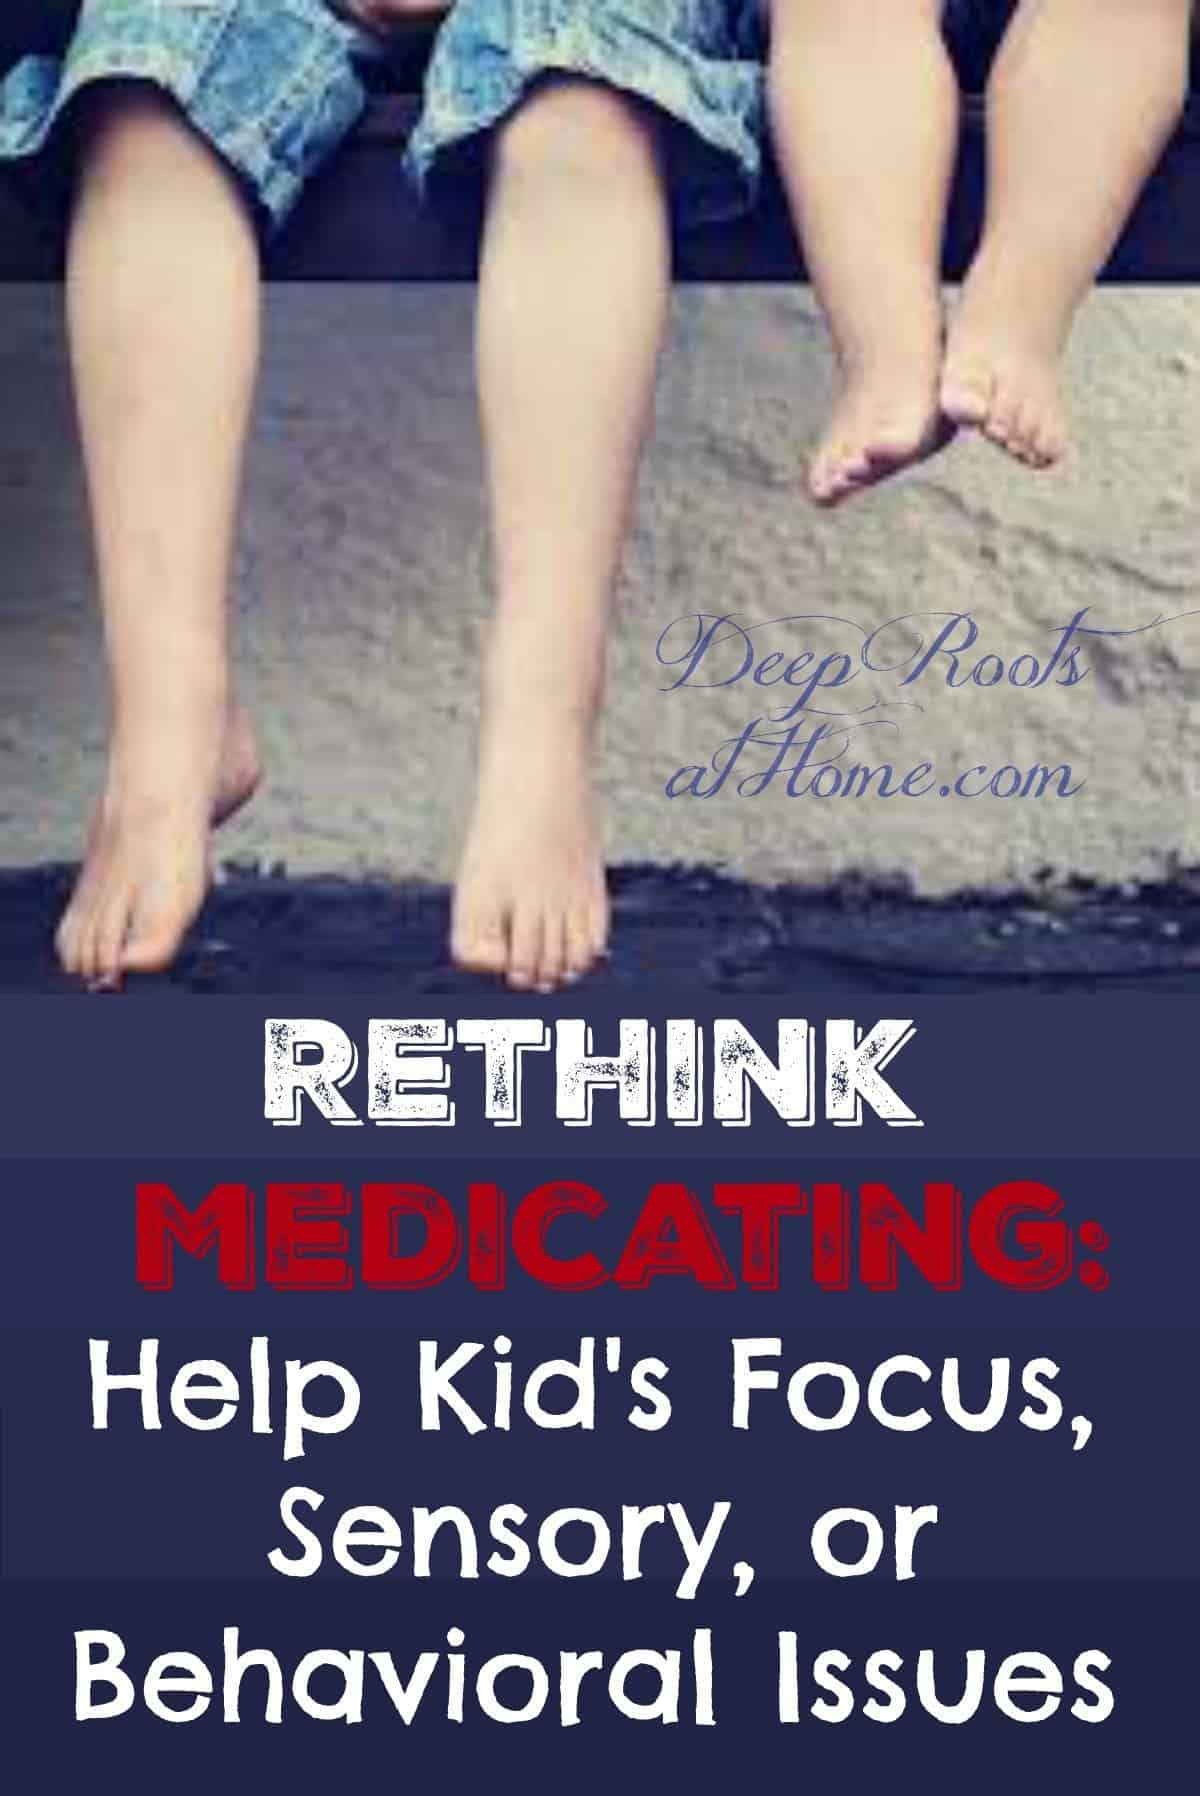 Rethink Medicating: Help Kid's Focus, Sensory, or Behavioral Issues Two young boys dangling their legs over a ledge, barefoot.